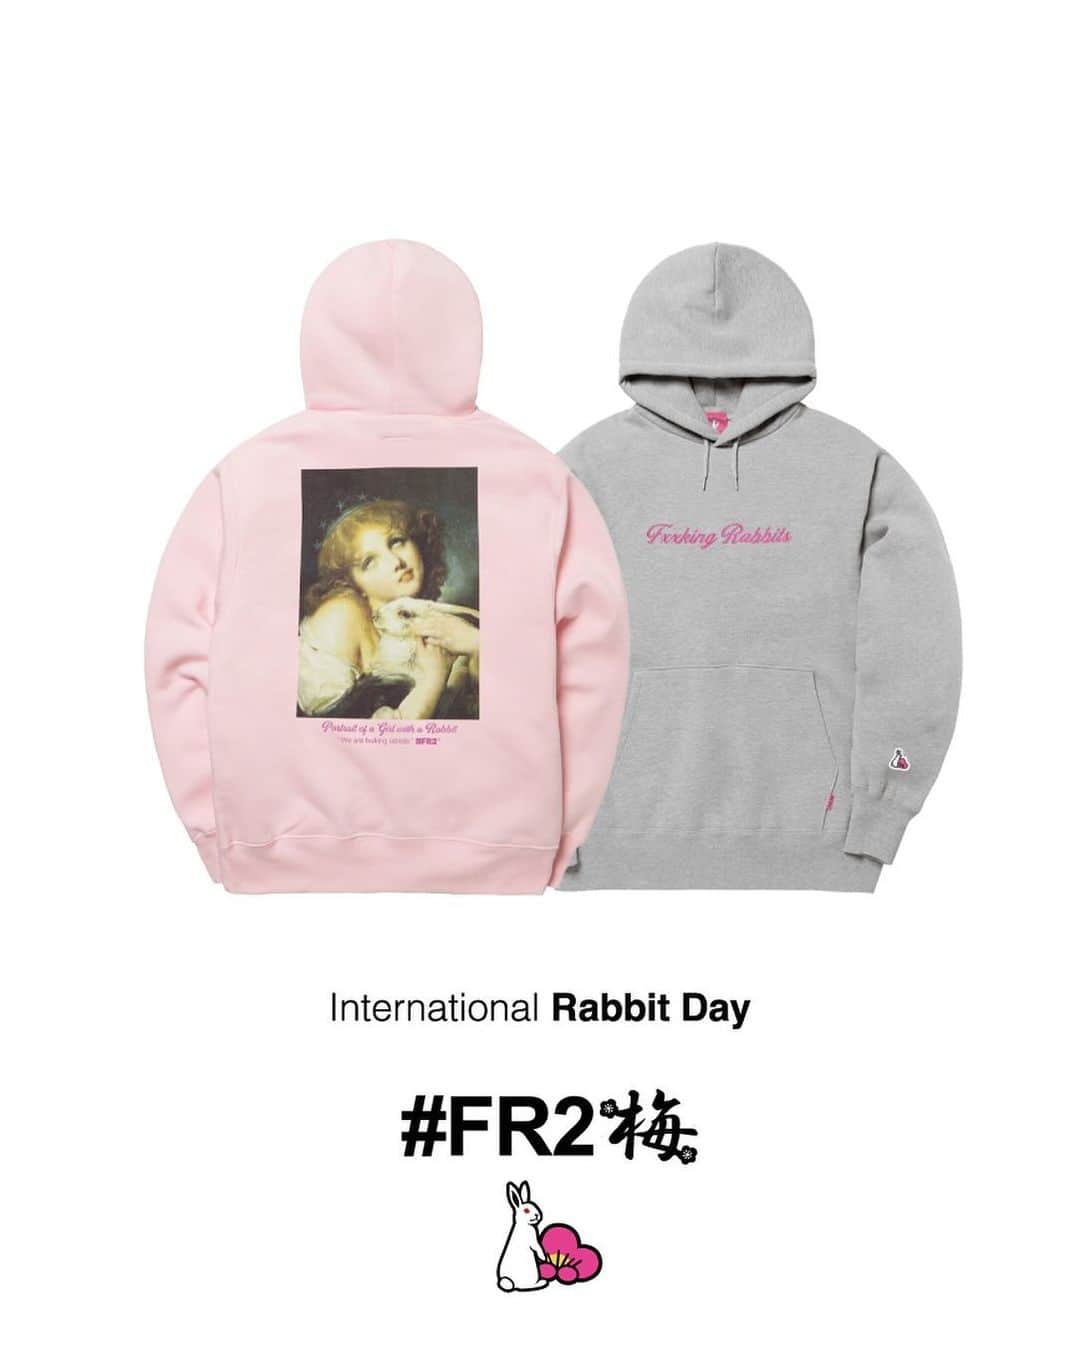 #FR2梅(UME)のインスタグラム：「"International Rabbit Day"  We will be selling the following products starting on 2023/9/23(Sat).  2023/9/23(Sat)より下記の商品を発売します。  ▪️Think of a rabbit Hoodie  #FR2梅 Exclusive  #FR2 #fxxkingrabbits #頭狂色情兎 #FR2梅 #nosexualservices #internationalrabbitday」